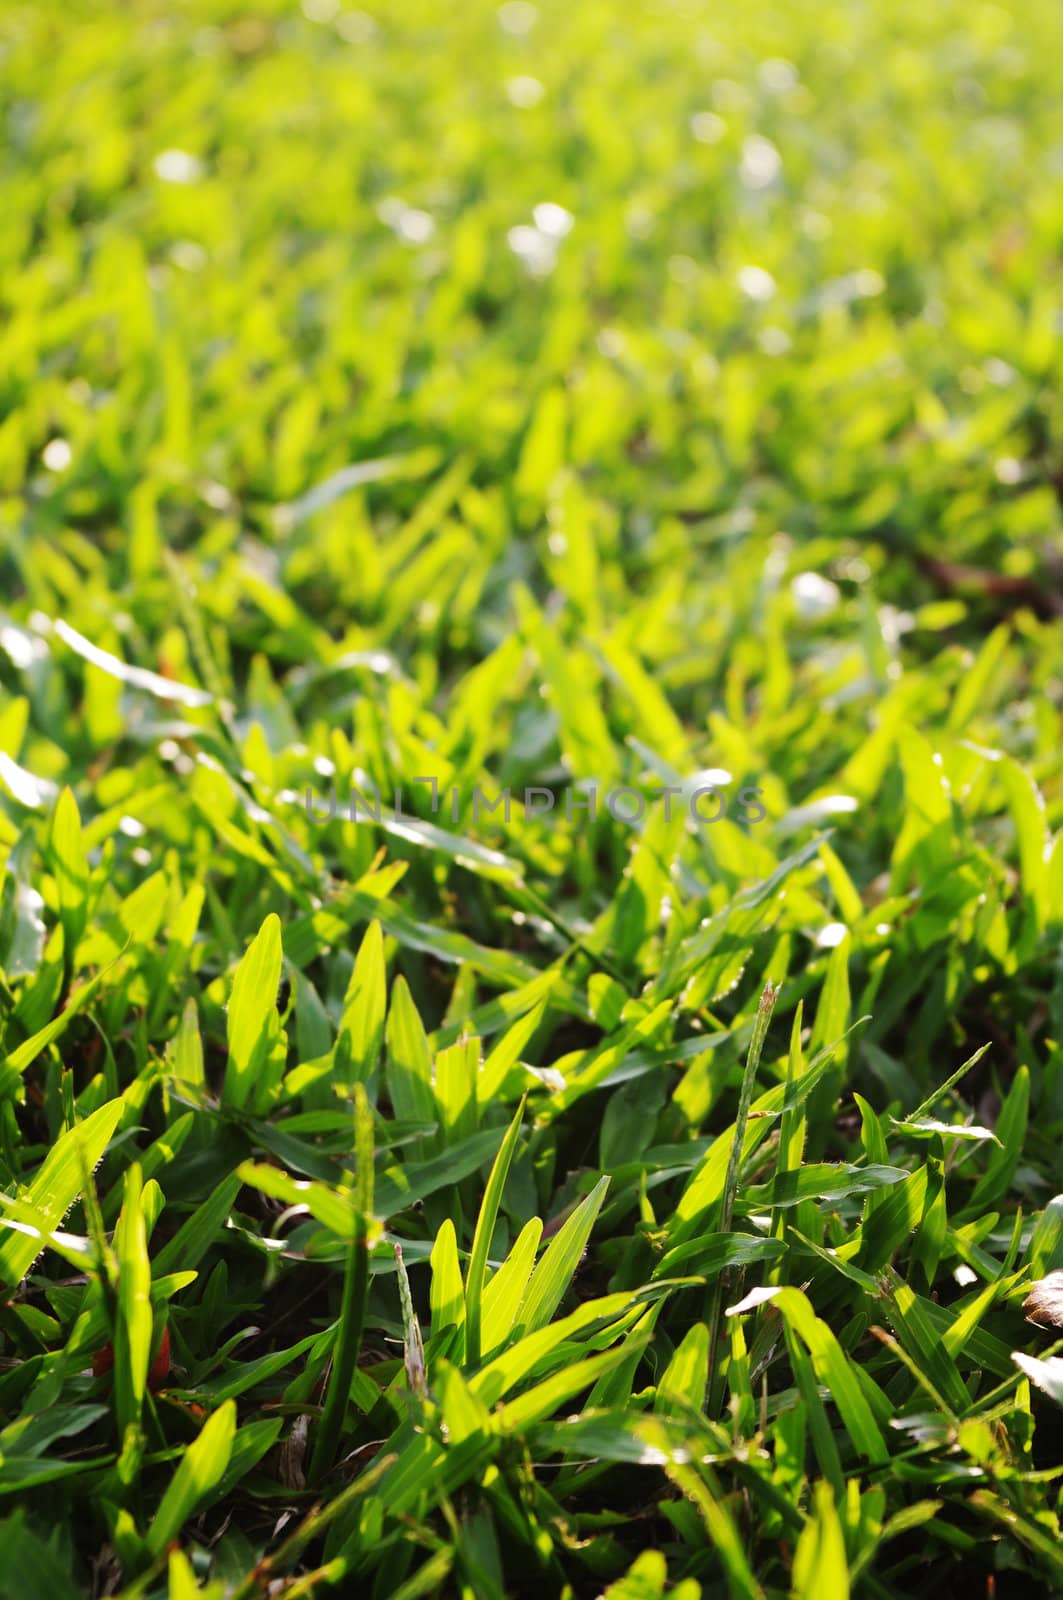 green grass background with sunlight shining through.